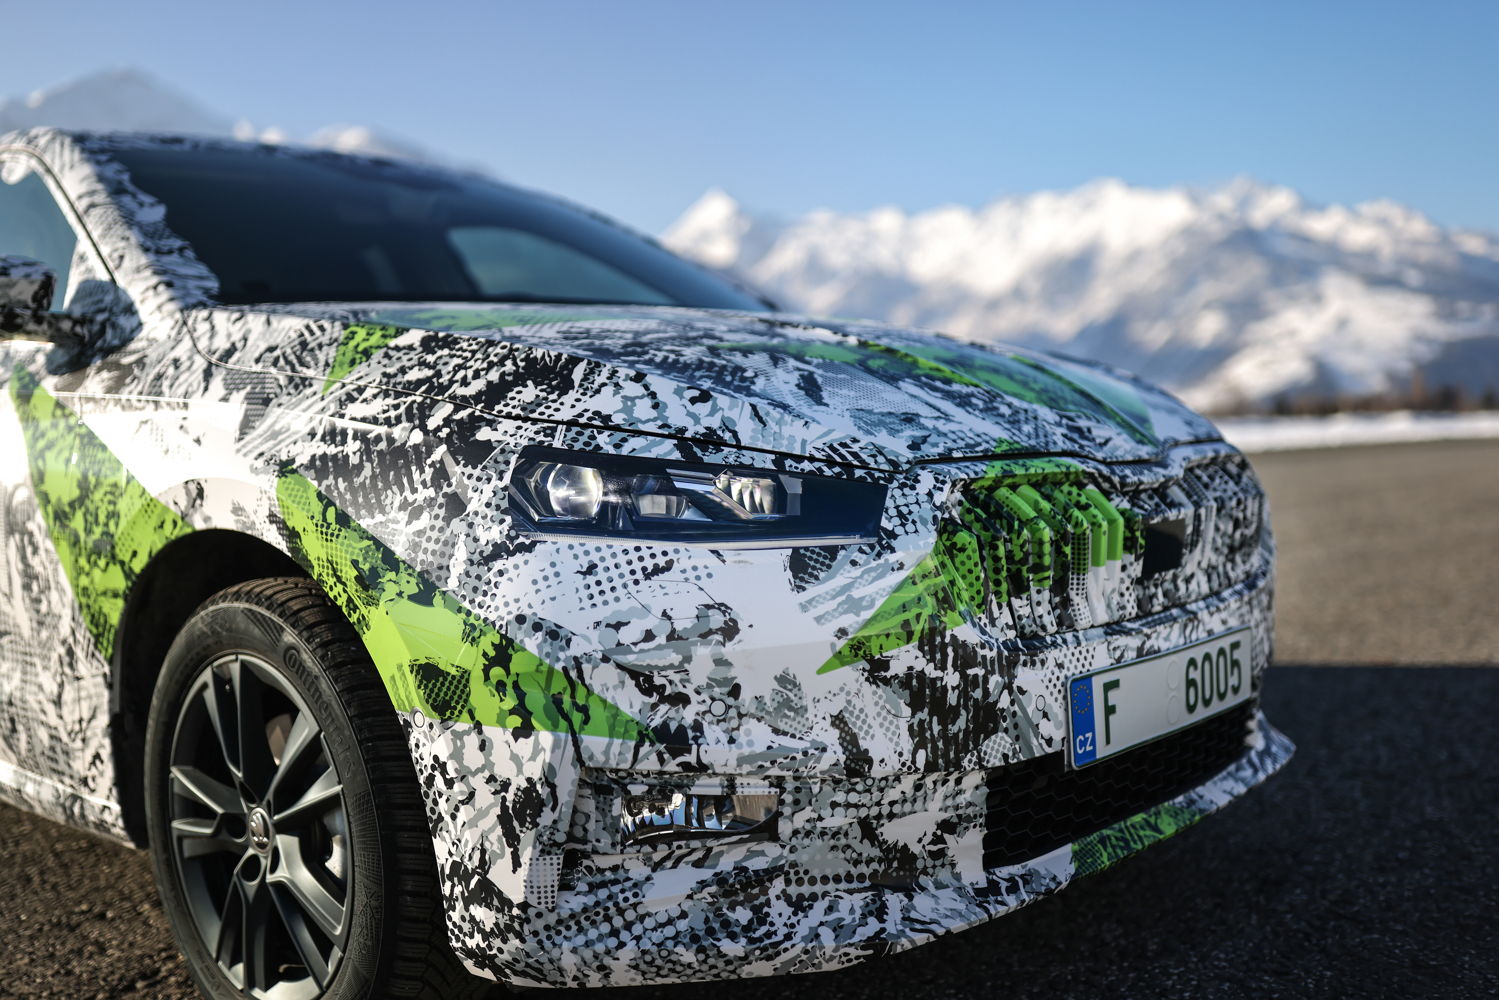 The fourth-generation FABIA, which will be released later this year, will again be available as a MONTE CARLO version.